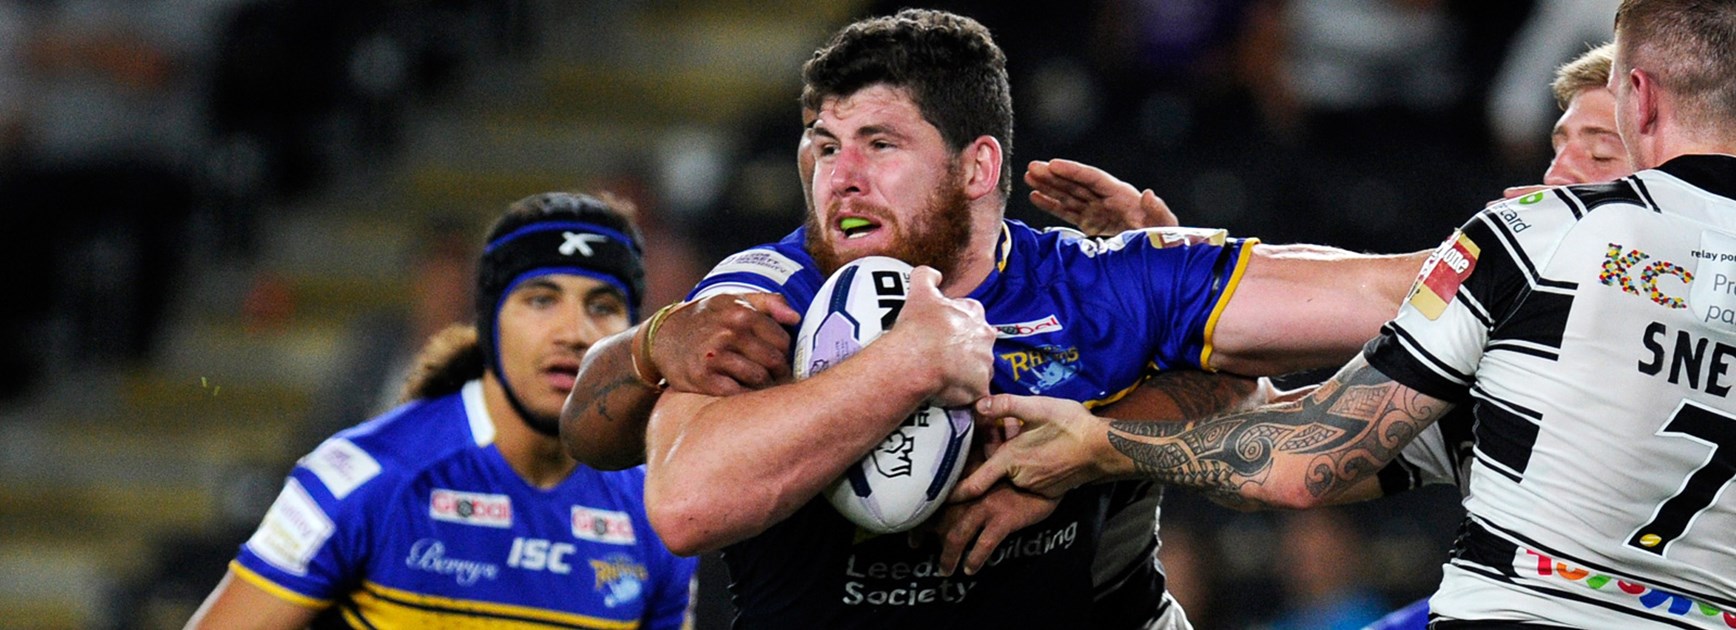 Mitch Garbutt is relishing the opportunity to play with Leeds in the UK Super League.